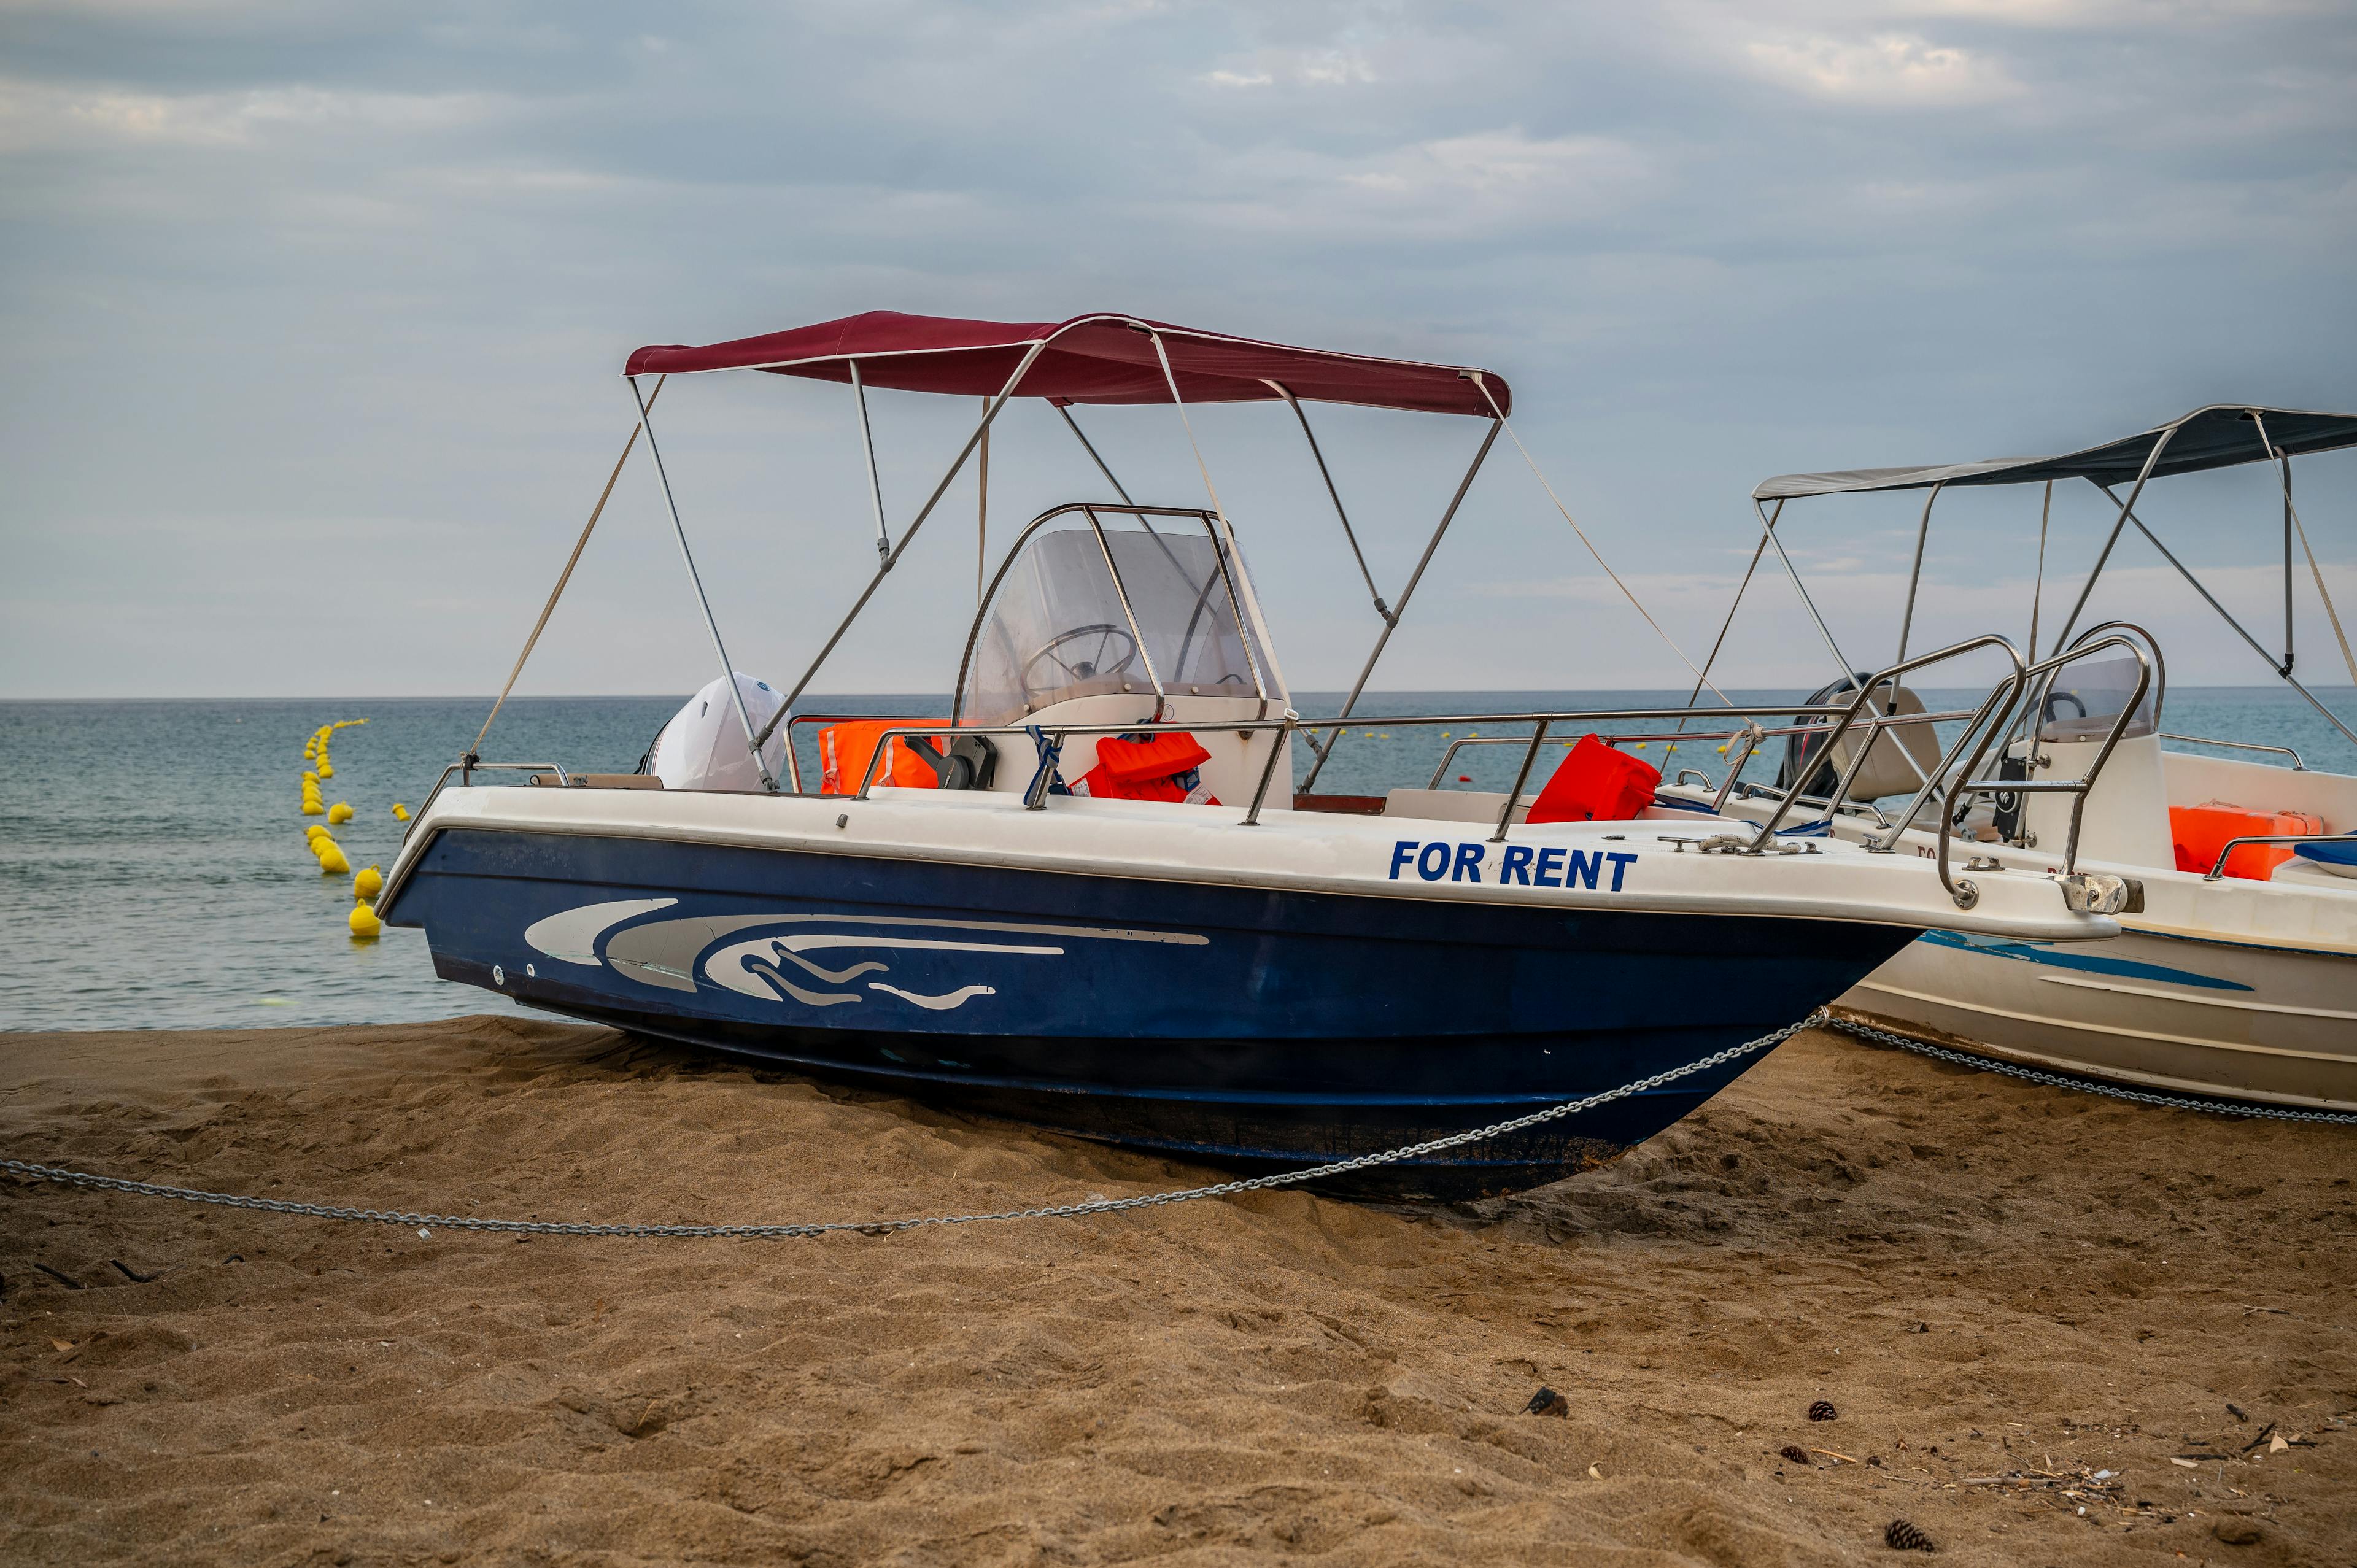 Find boat rentals today with Boaters List!